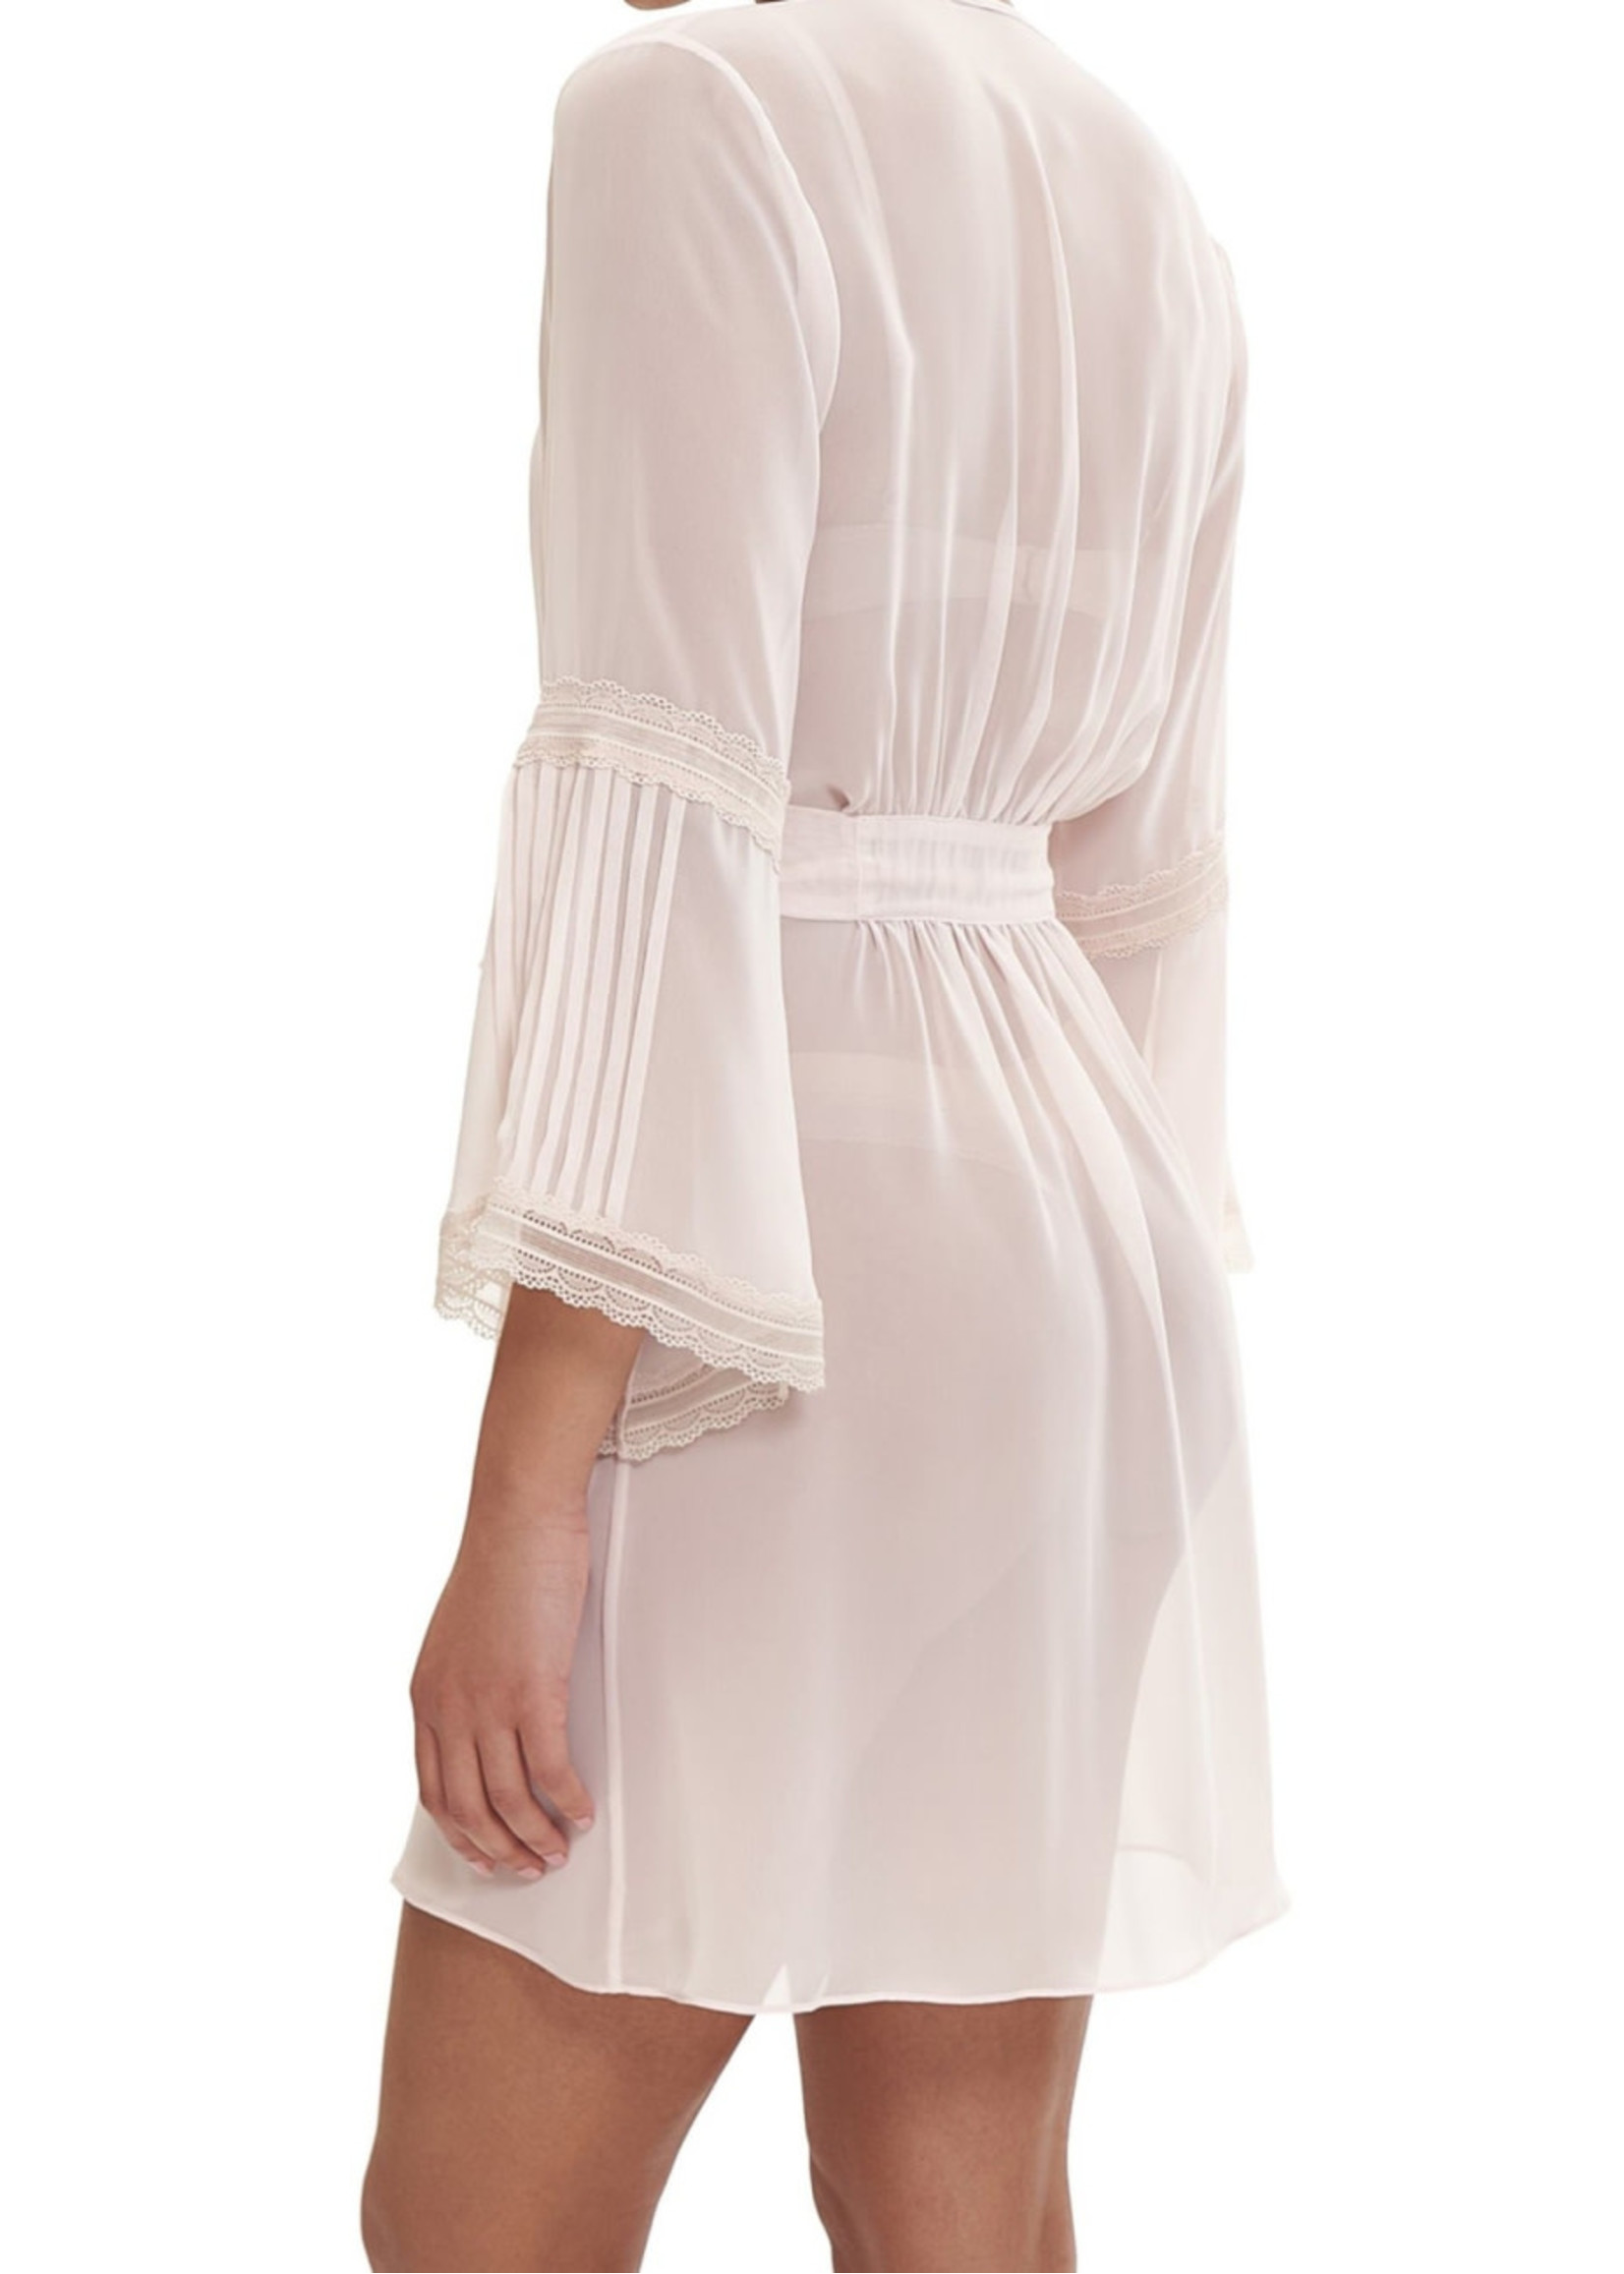 Rya Annette Chiffon Cover Up